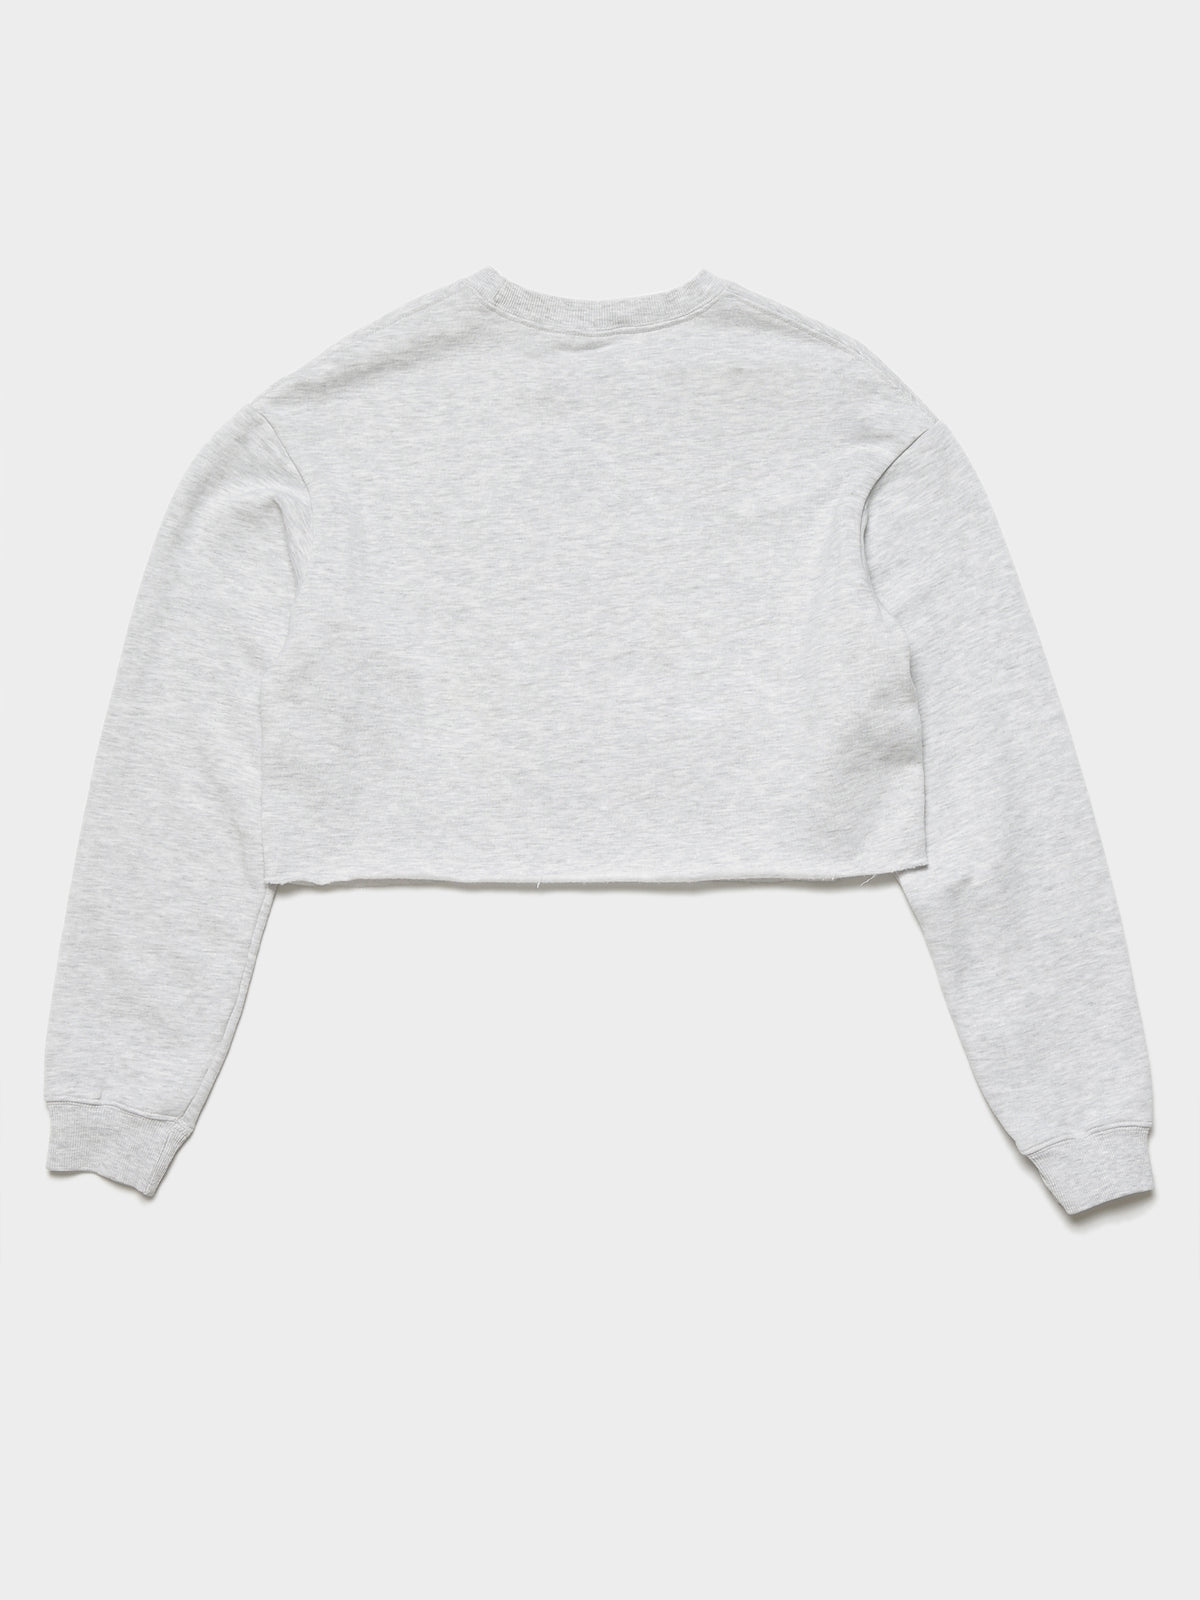 Vintage Arch George Town Cropped Crew Jumper in White Marl